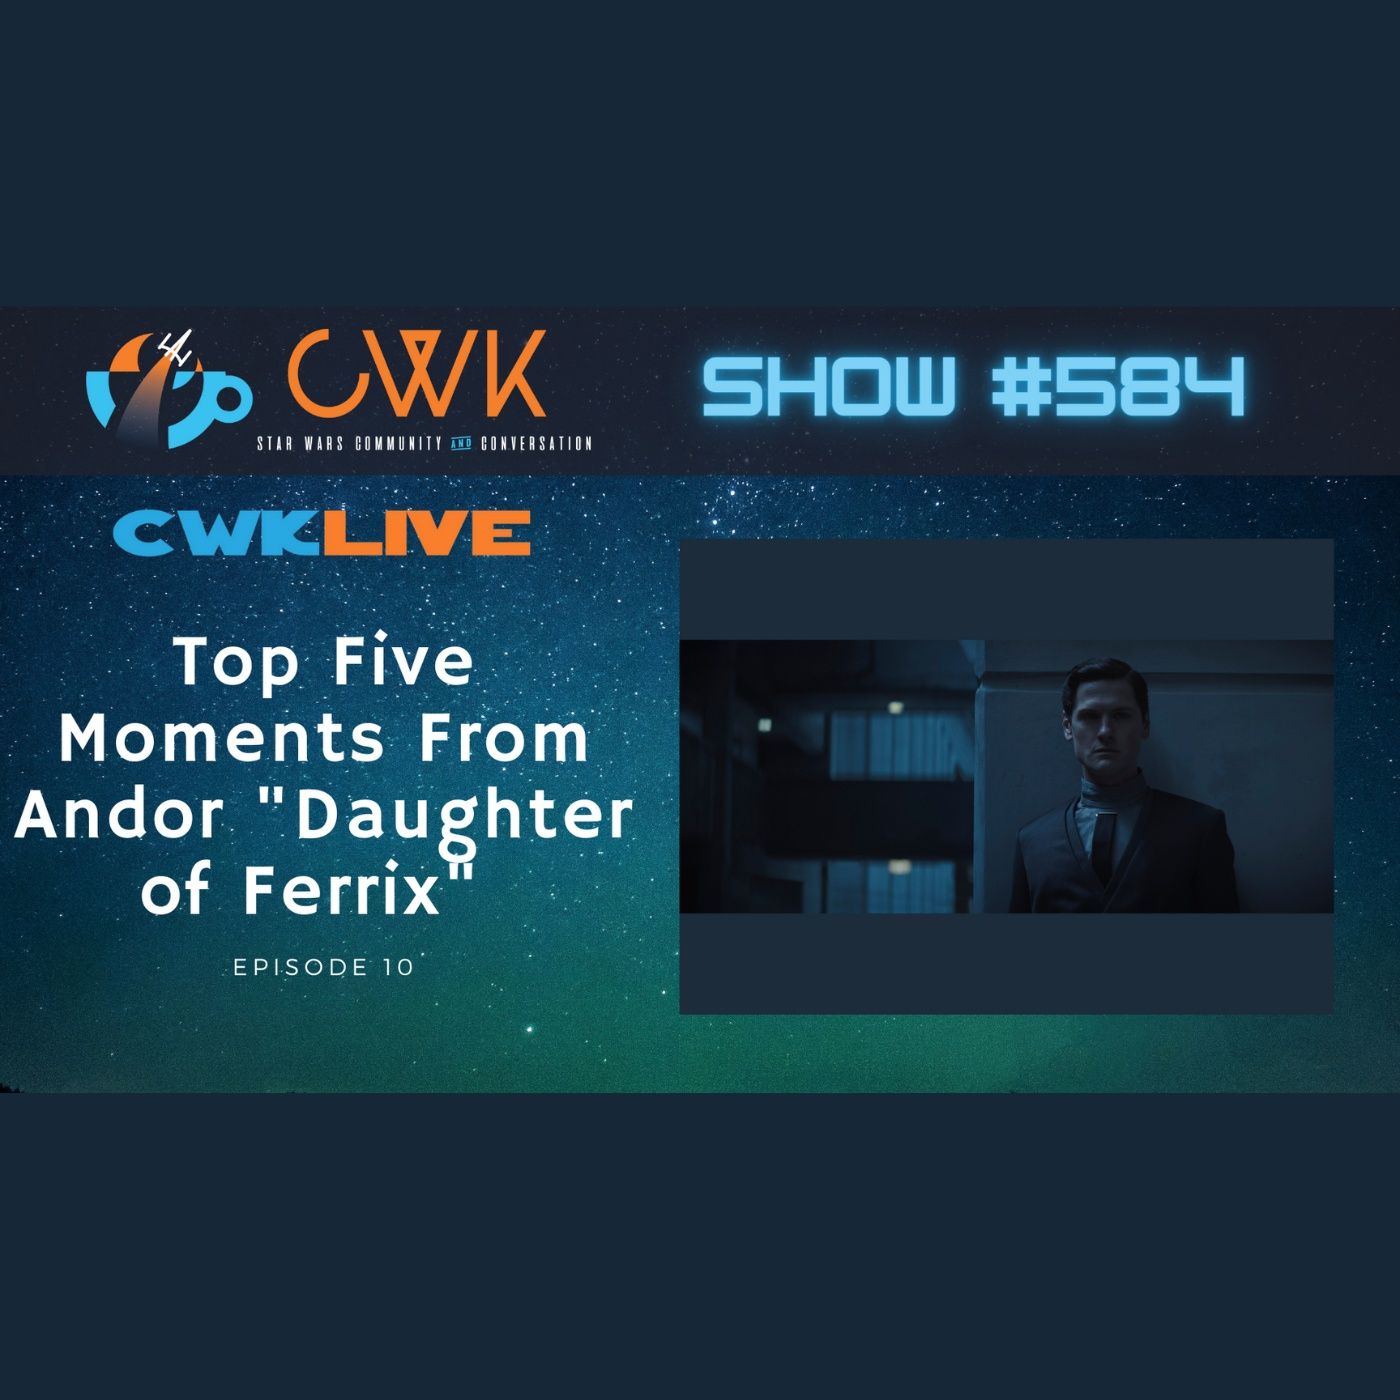 CWK Show #584 LIVE: Top Five Moments From Andor ”Daughter of Ferrix”